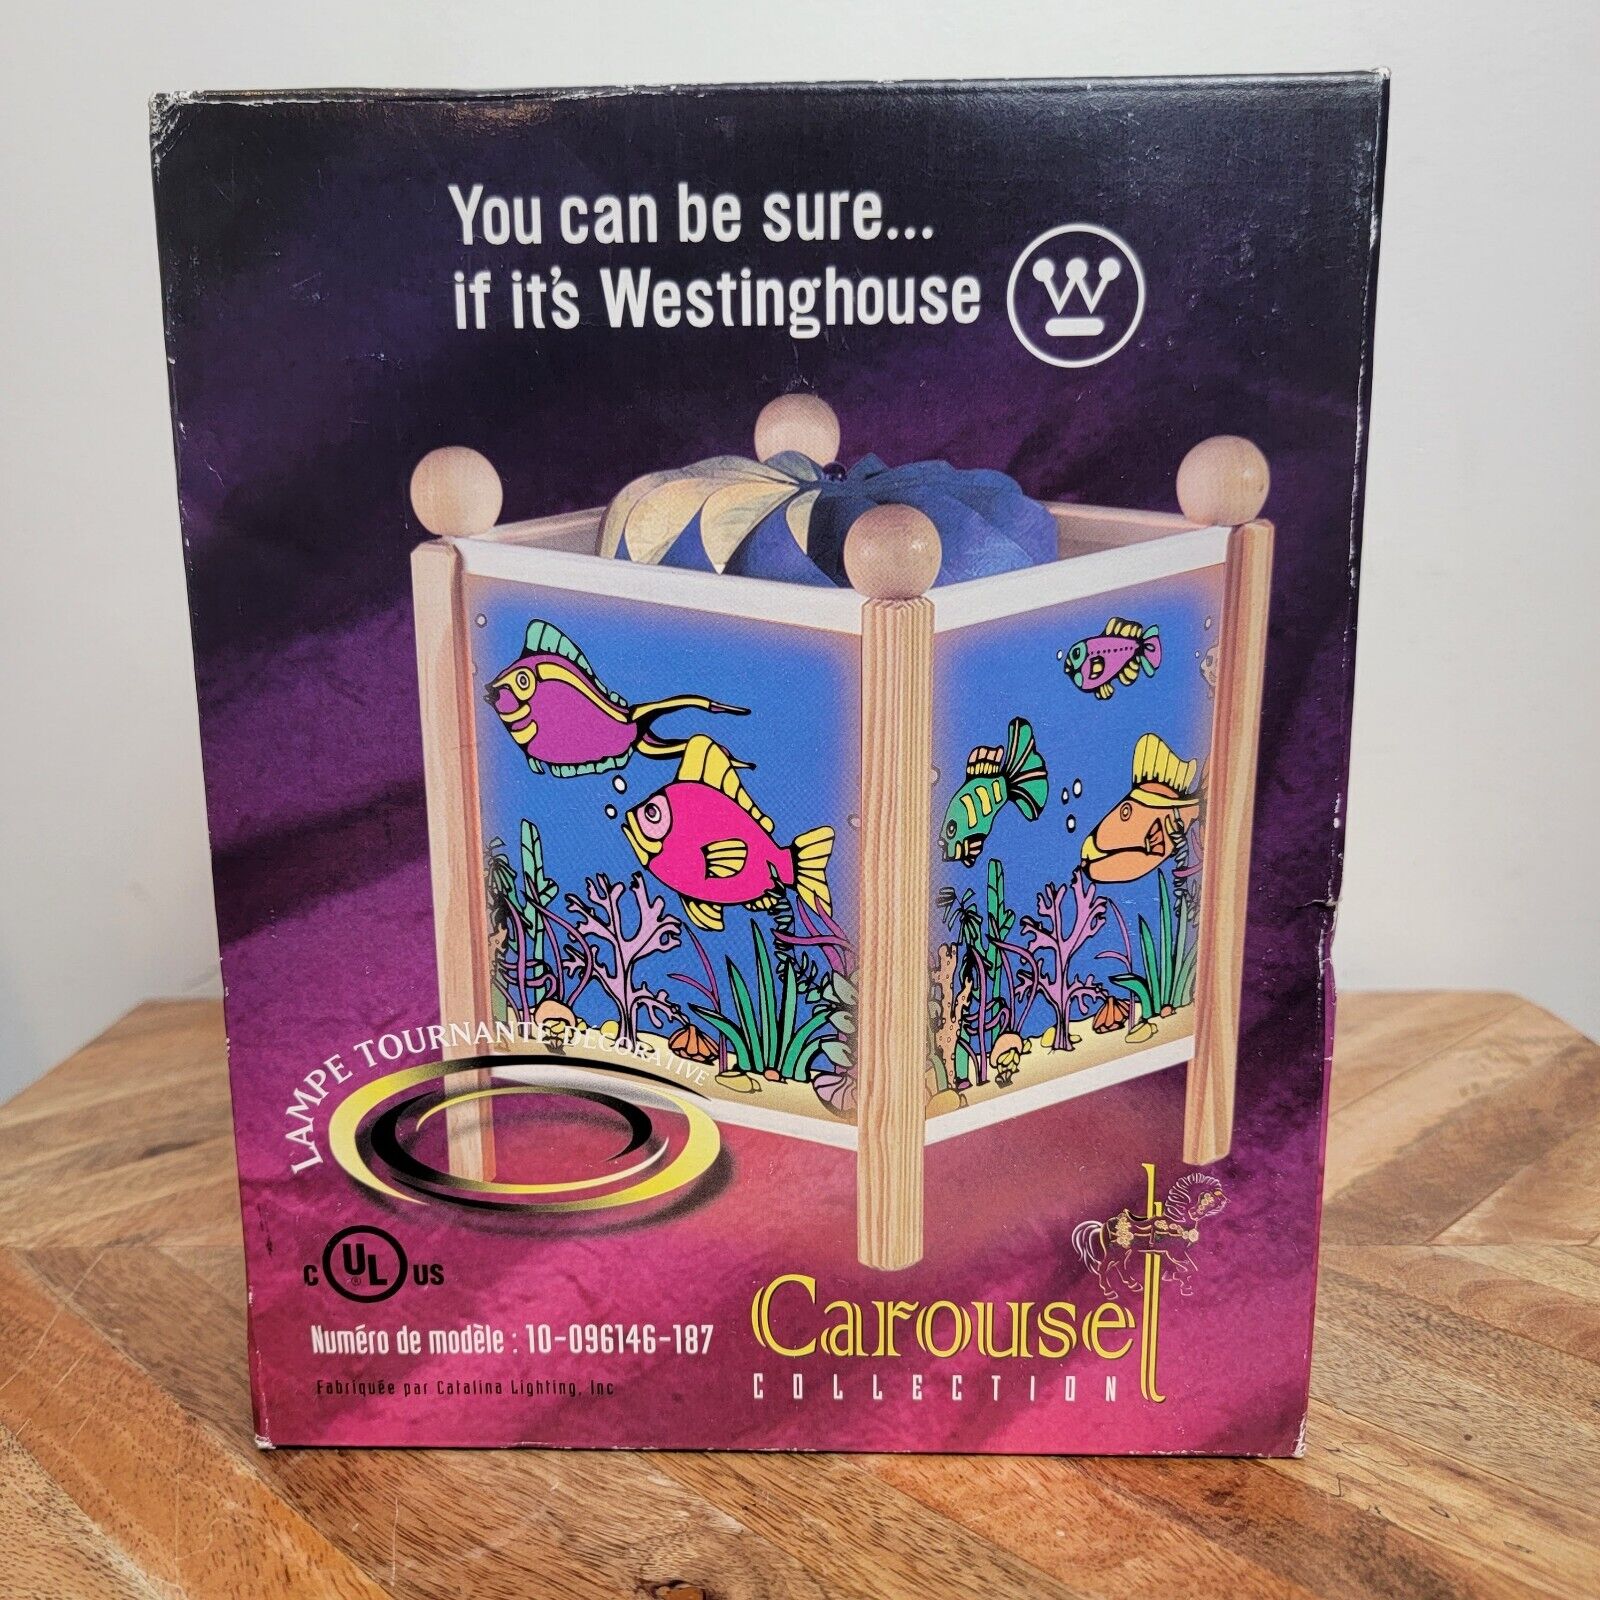 Vintage 1999 Westinghouse Carousel Collection Spinning Fish Ocean Design Lamp